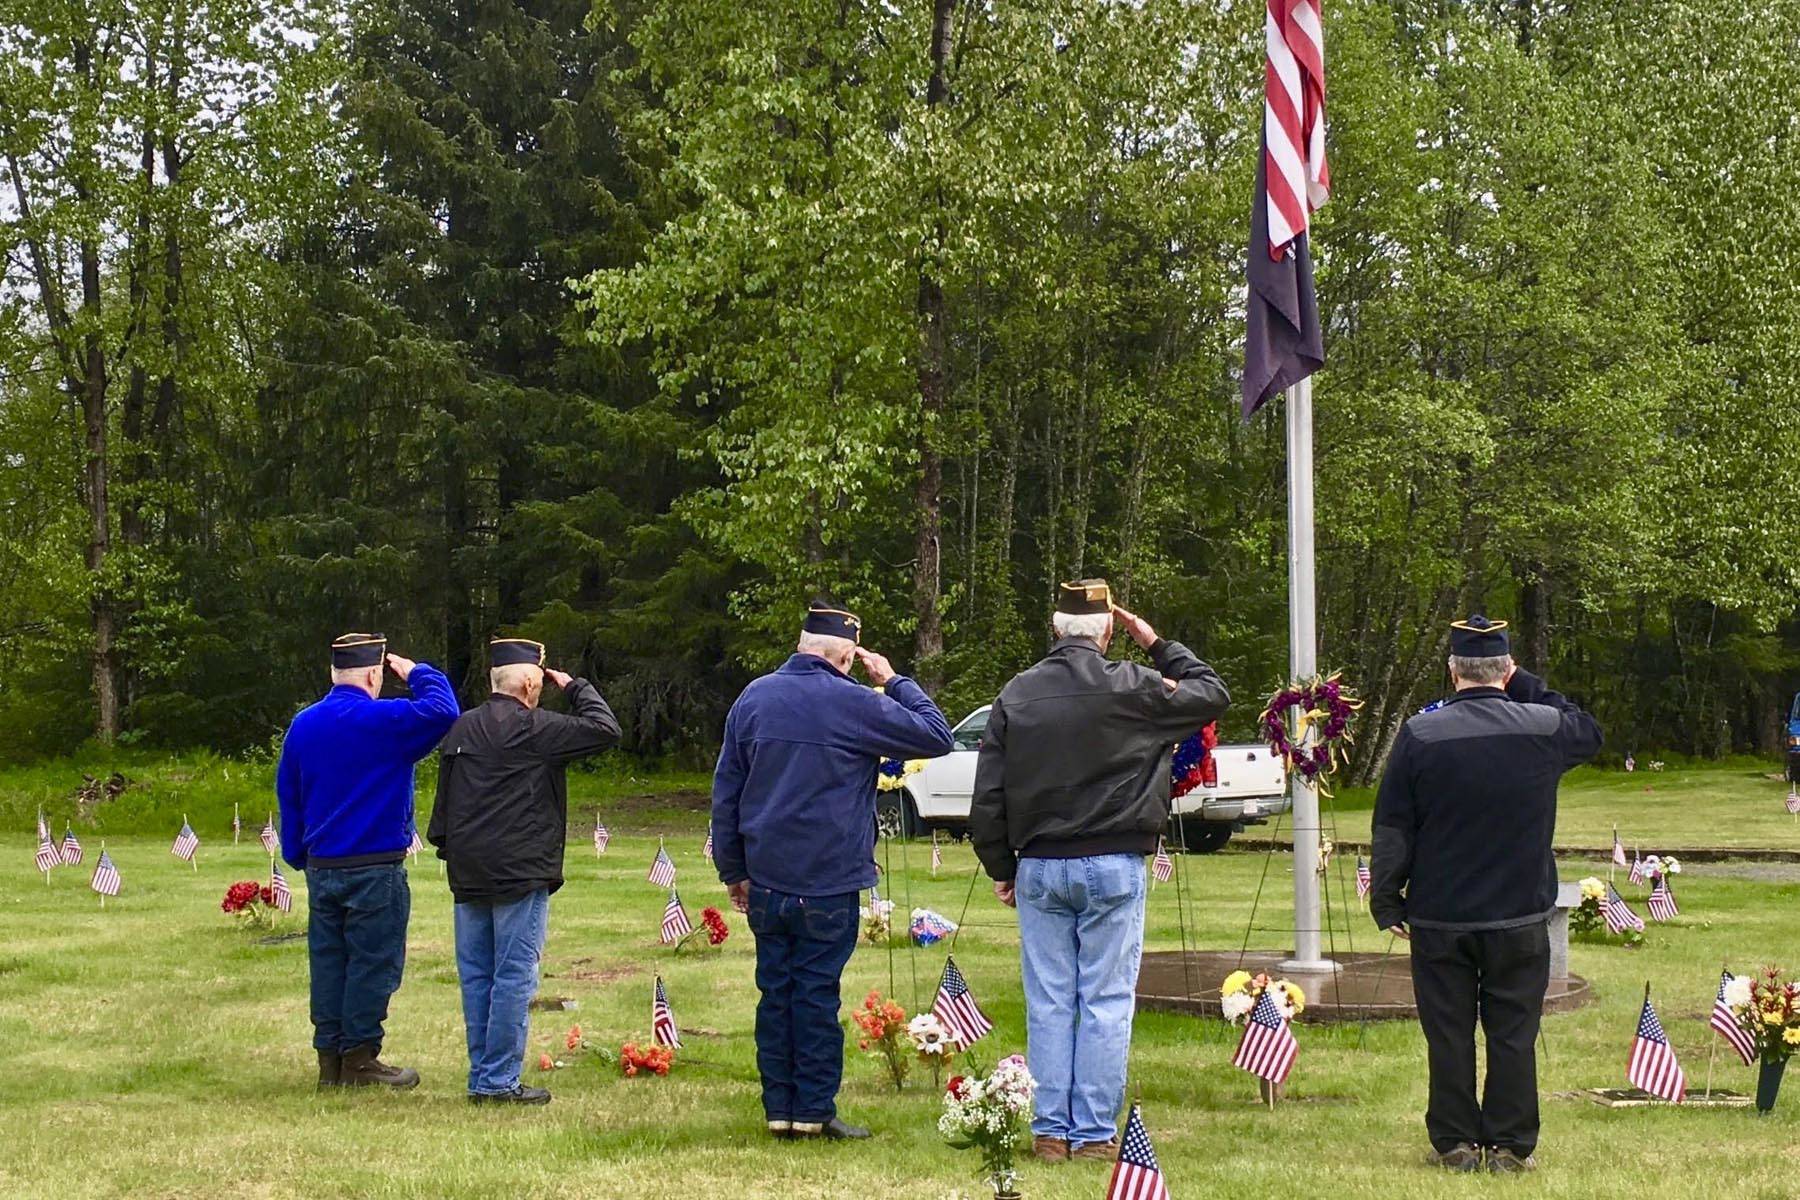 Members of the American Legion Post in Juneau salute after laying wreaths in the Alaska Memorial Park on Memorial Day, May 25, 2020. (Courtesy photo | Susan Clutton)